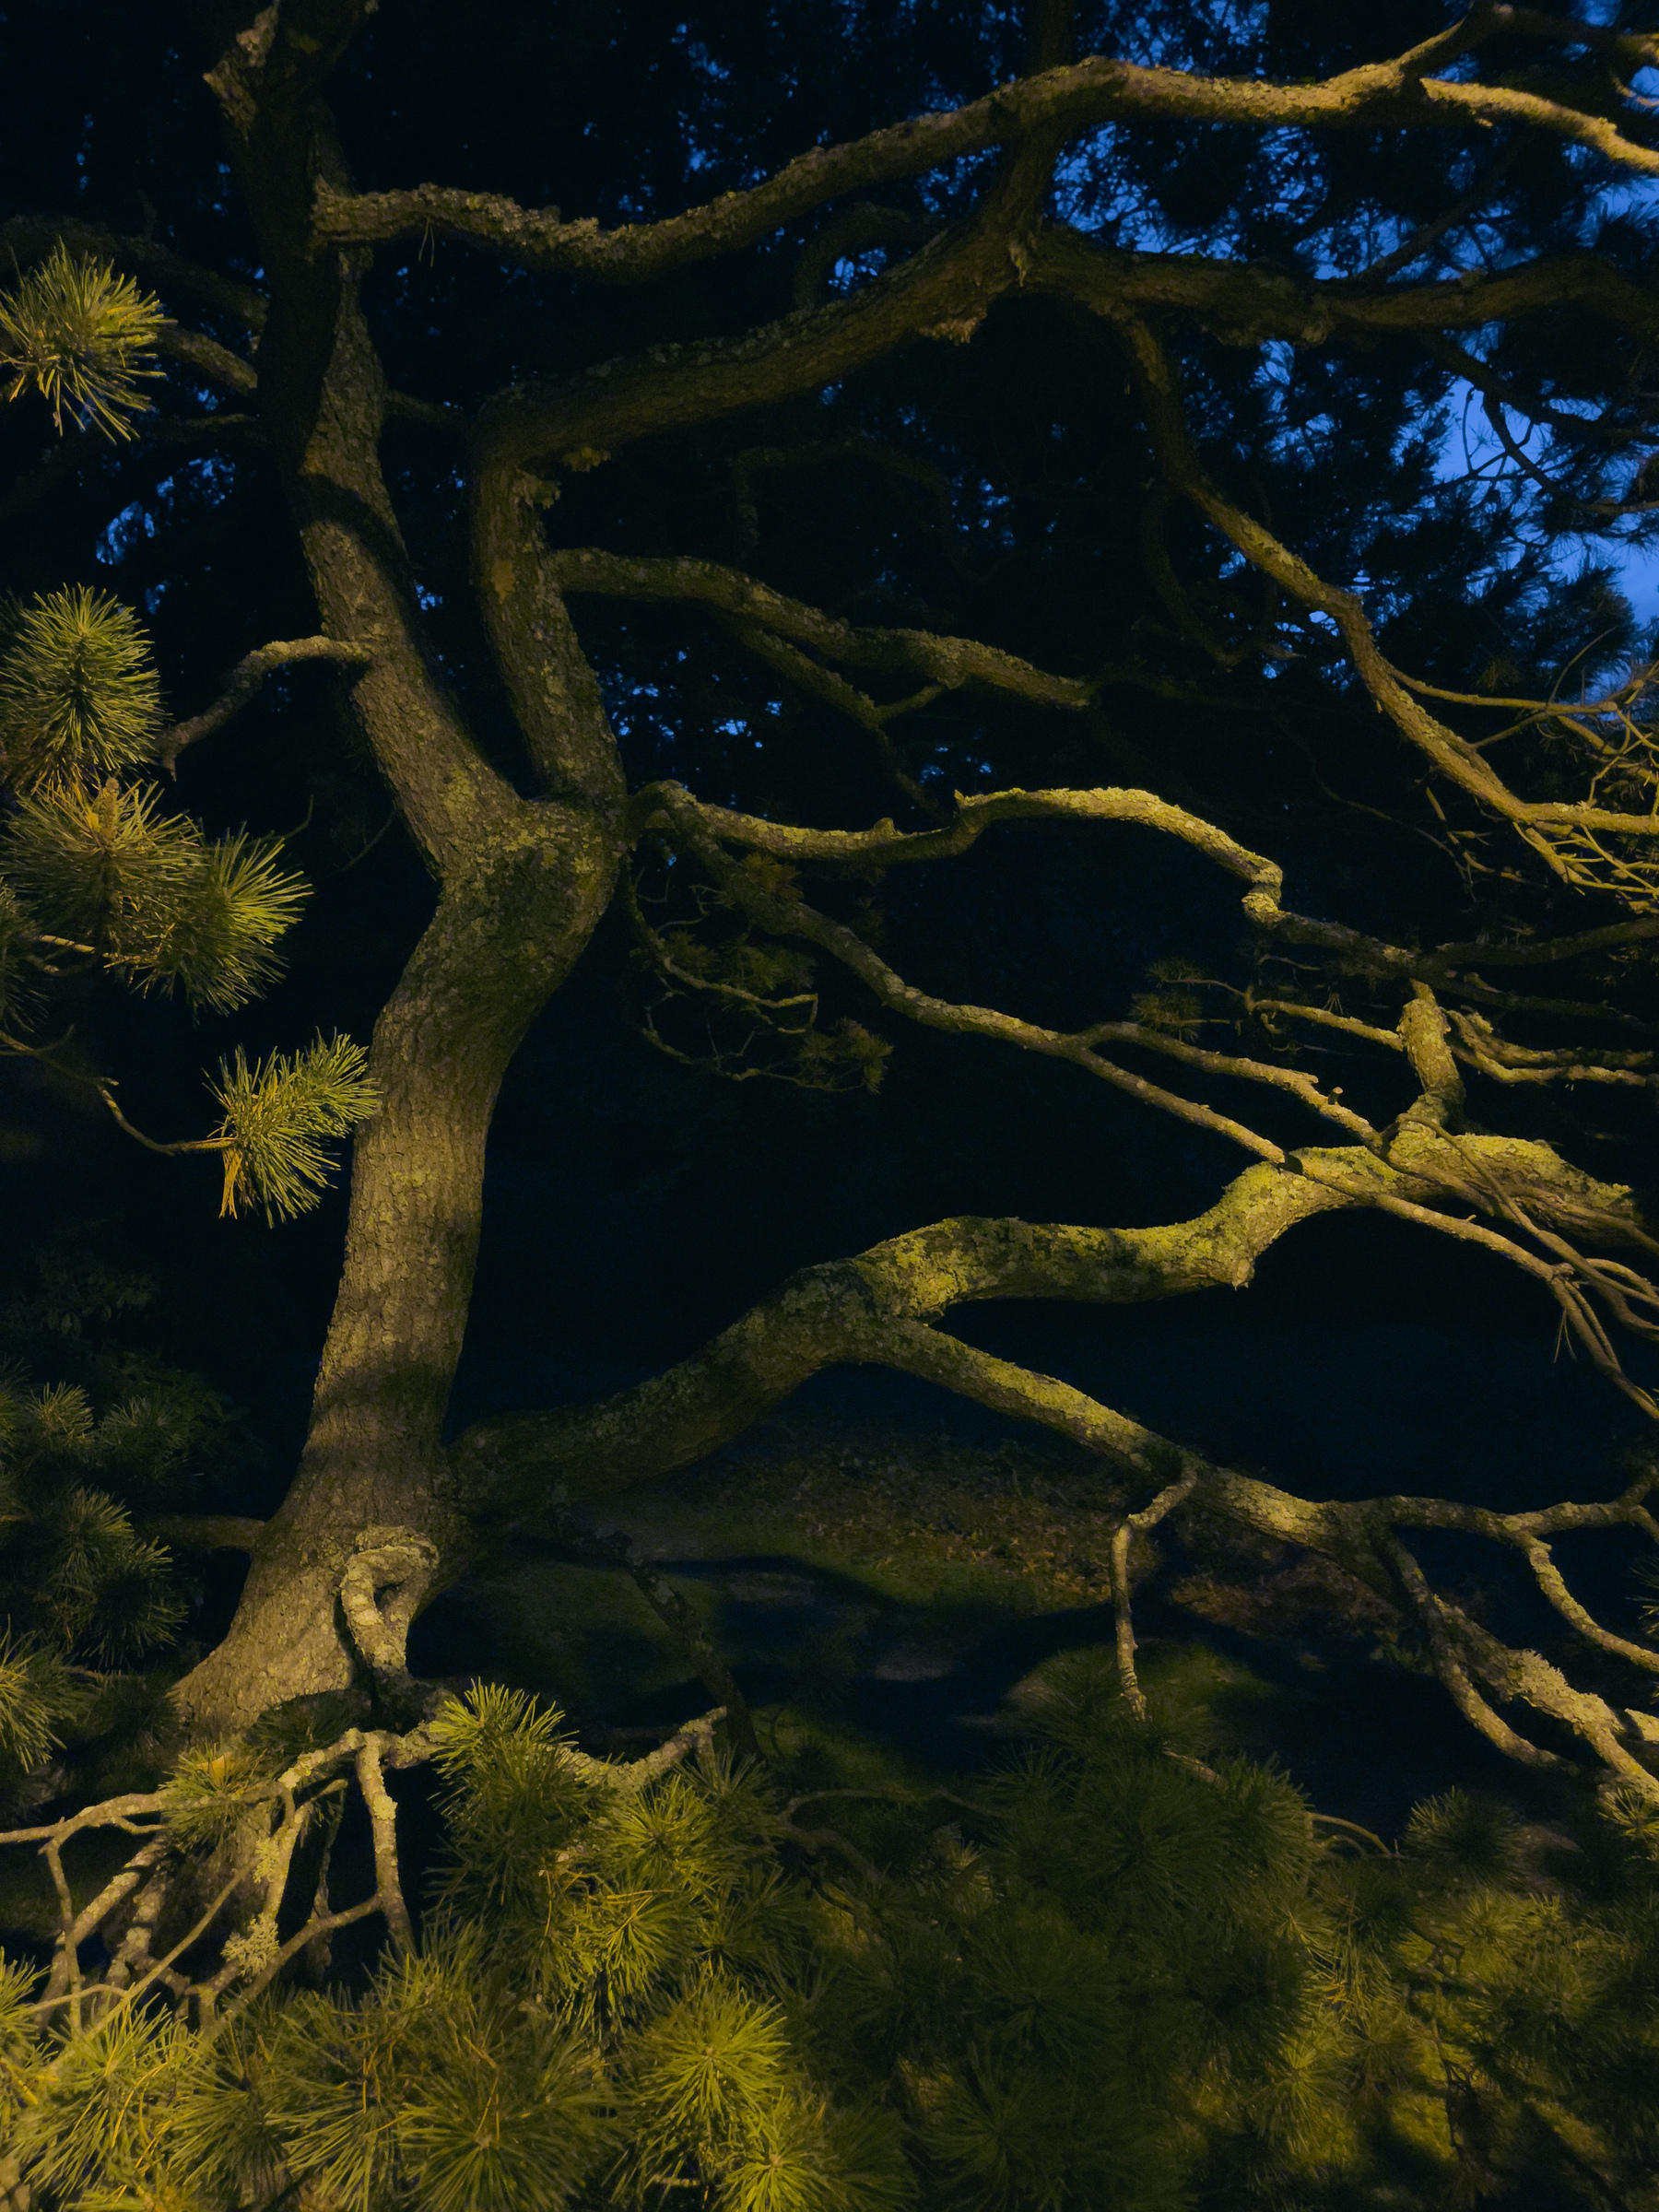 Tree trunk and branches lit by streetlights.